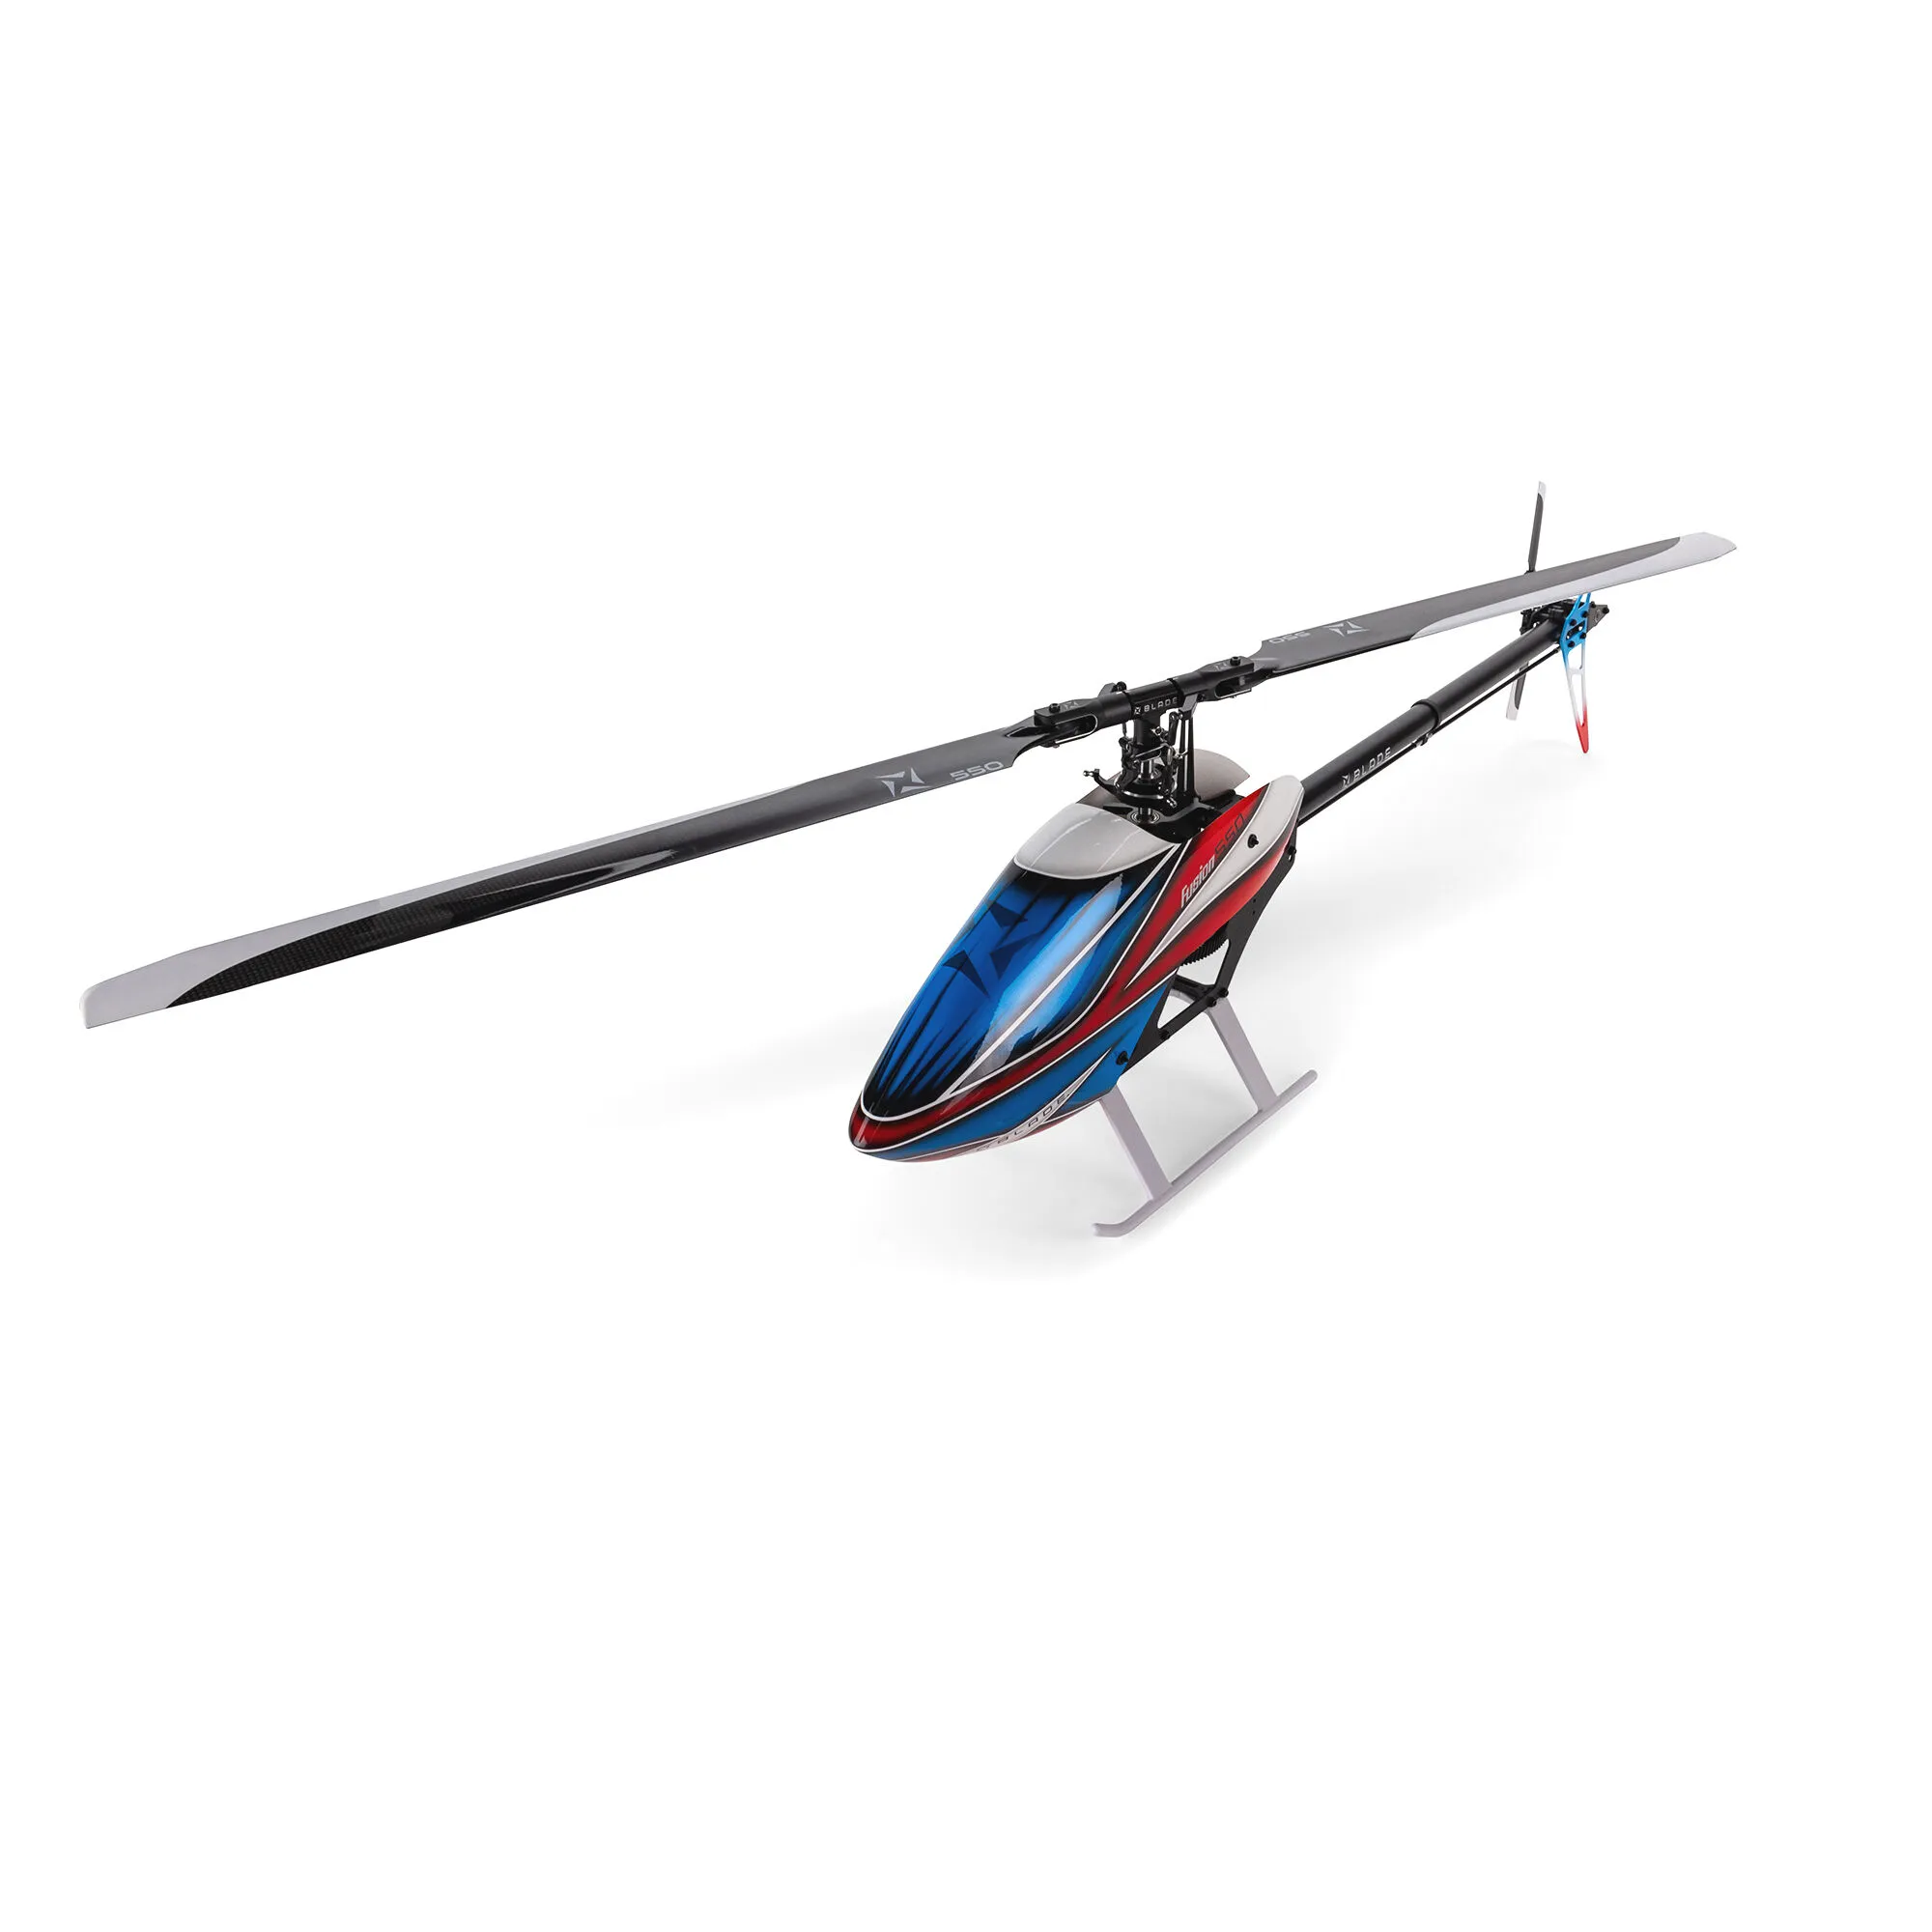 Blade Fusion 550 Helicopter Kit with Motor